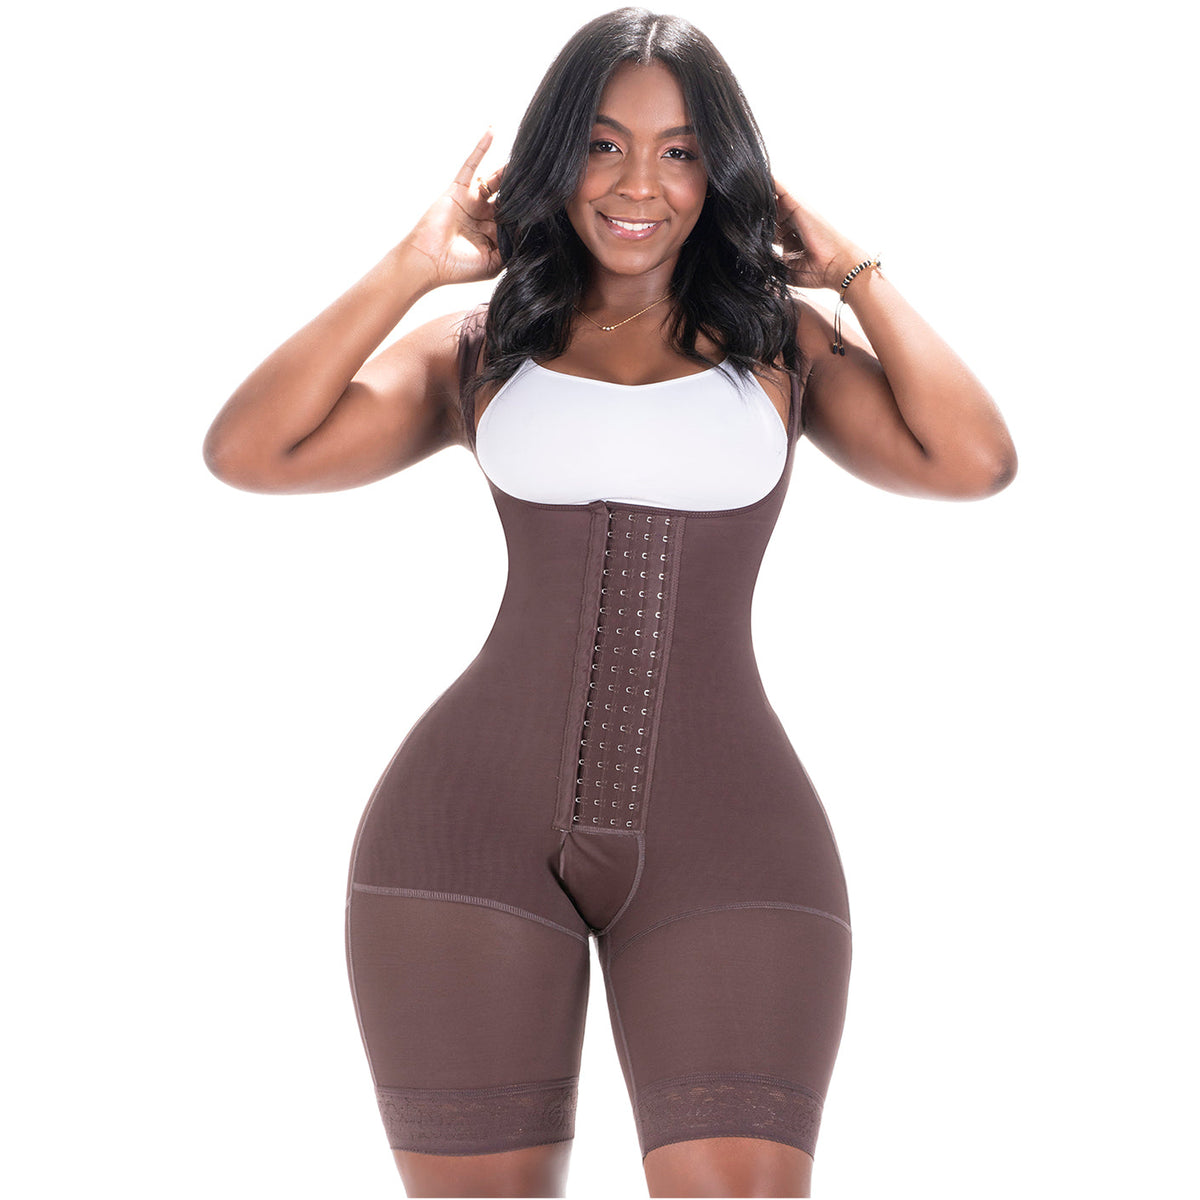 High Compression Wide straps Mid-Thigh Body Suit Slimming Shaper - -Nude-S  